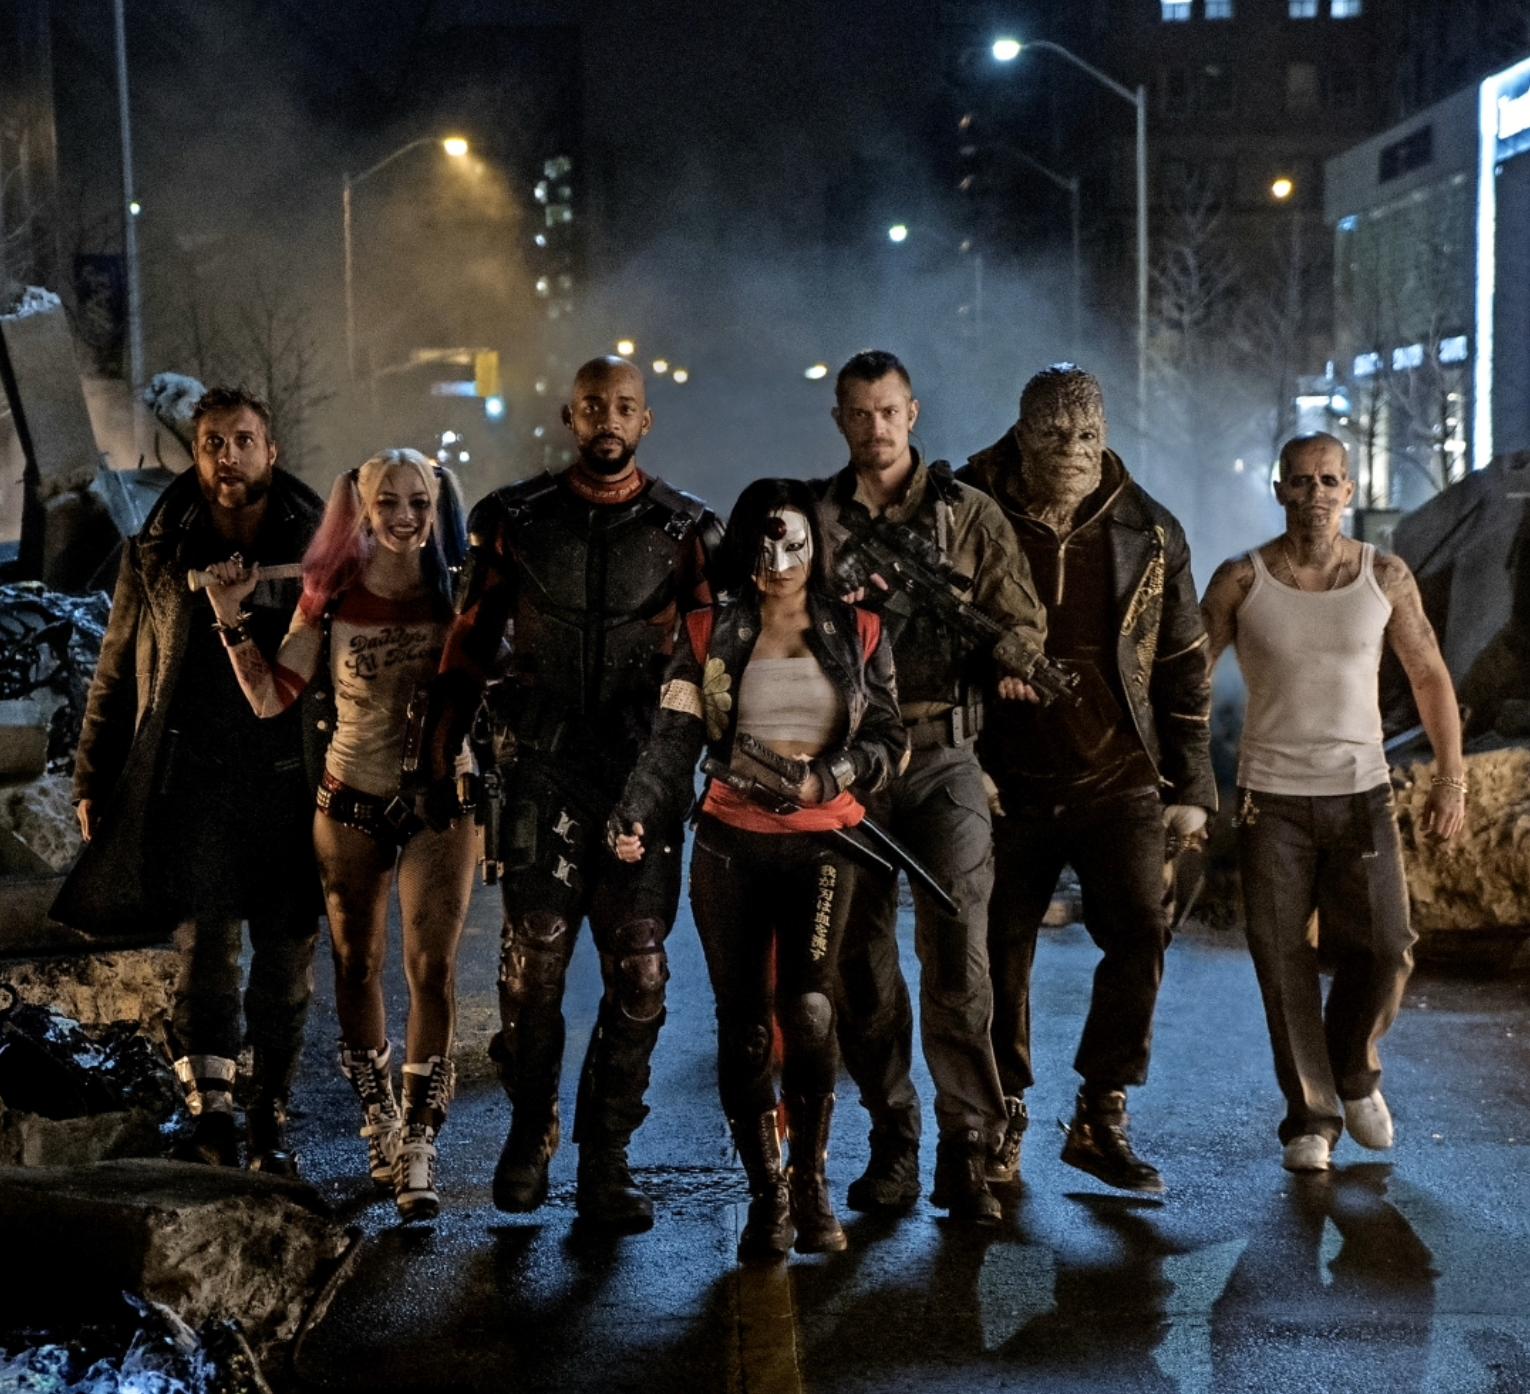 Suicide Squad: Movie Review - Squalid sexism masquerading as anarchy